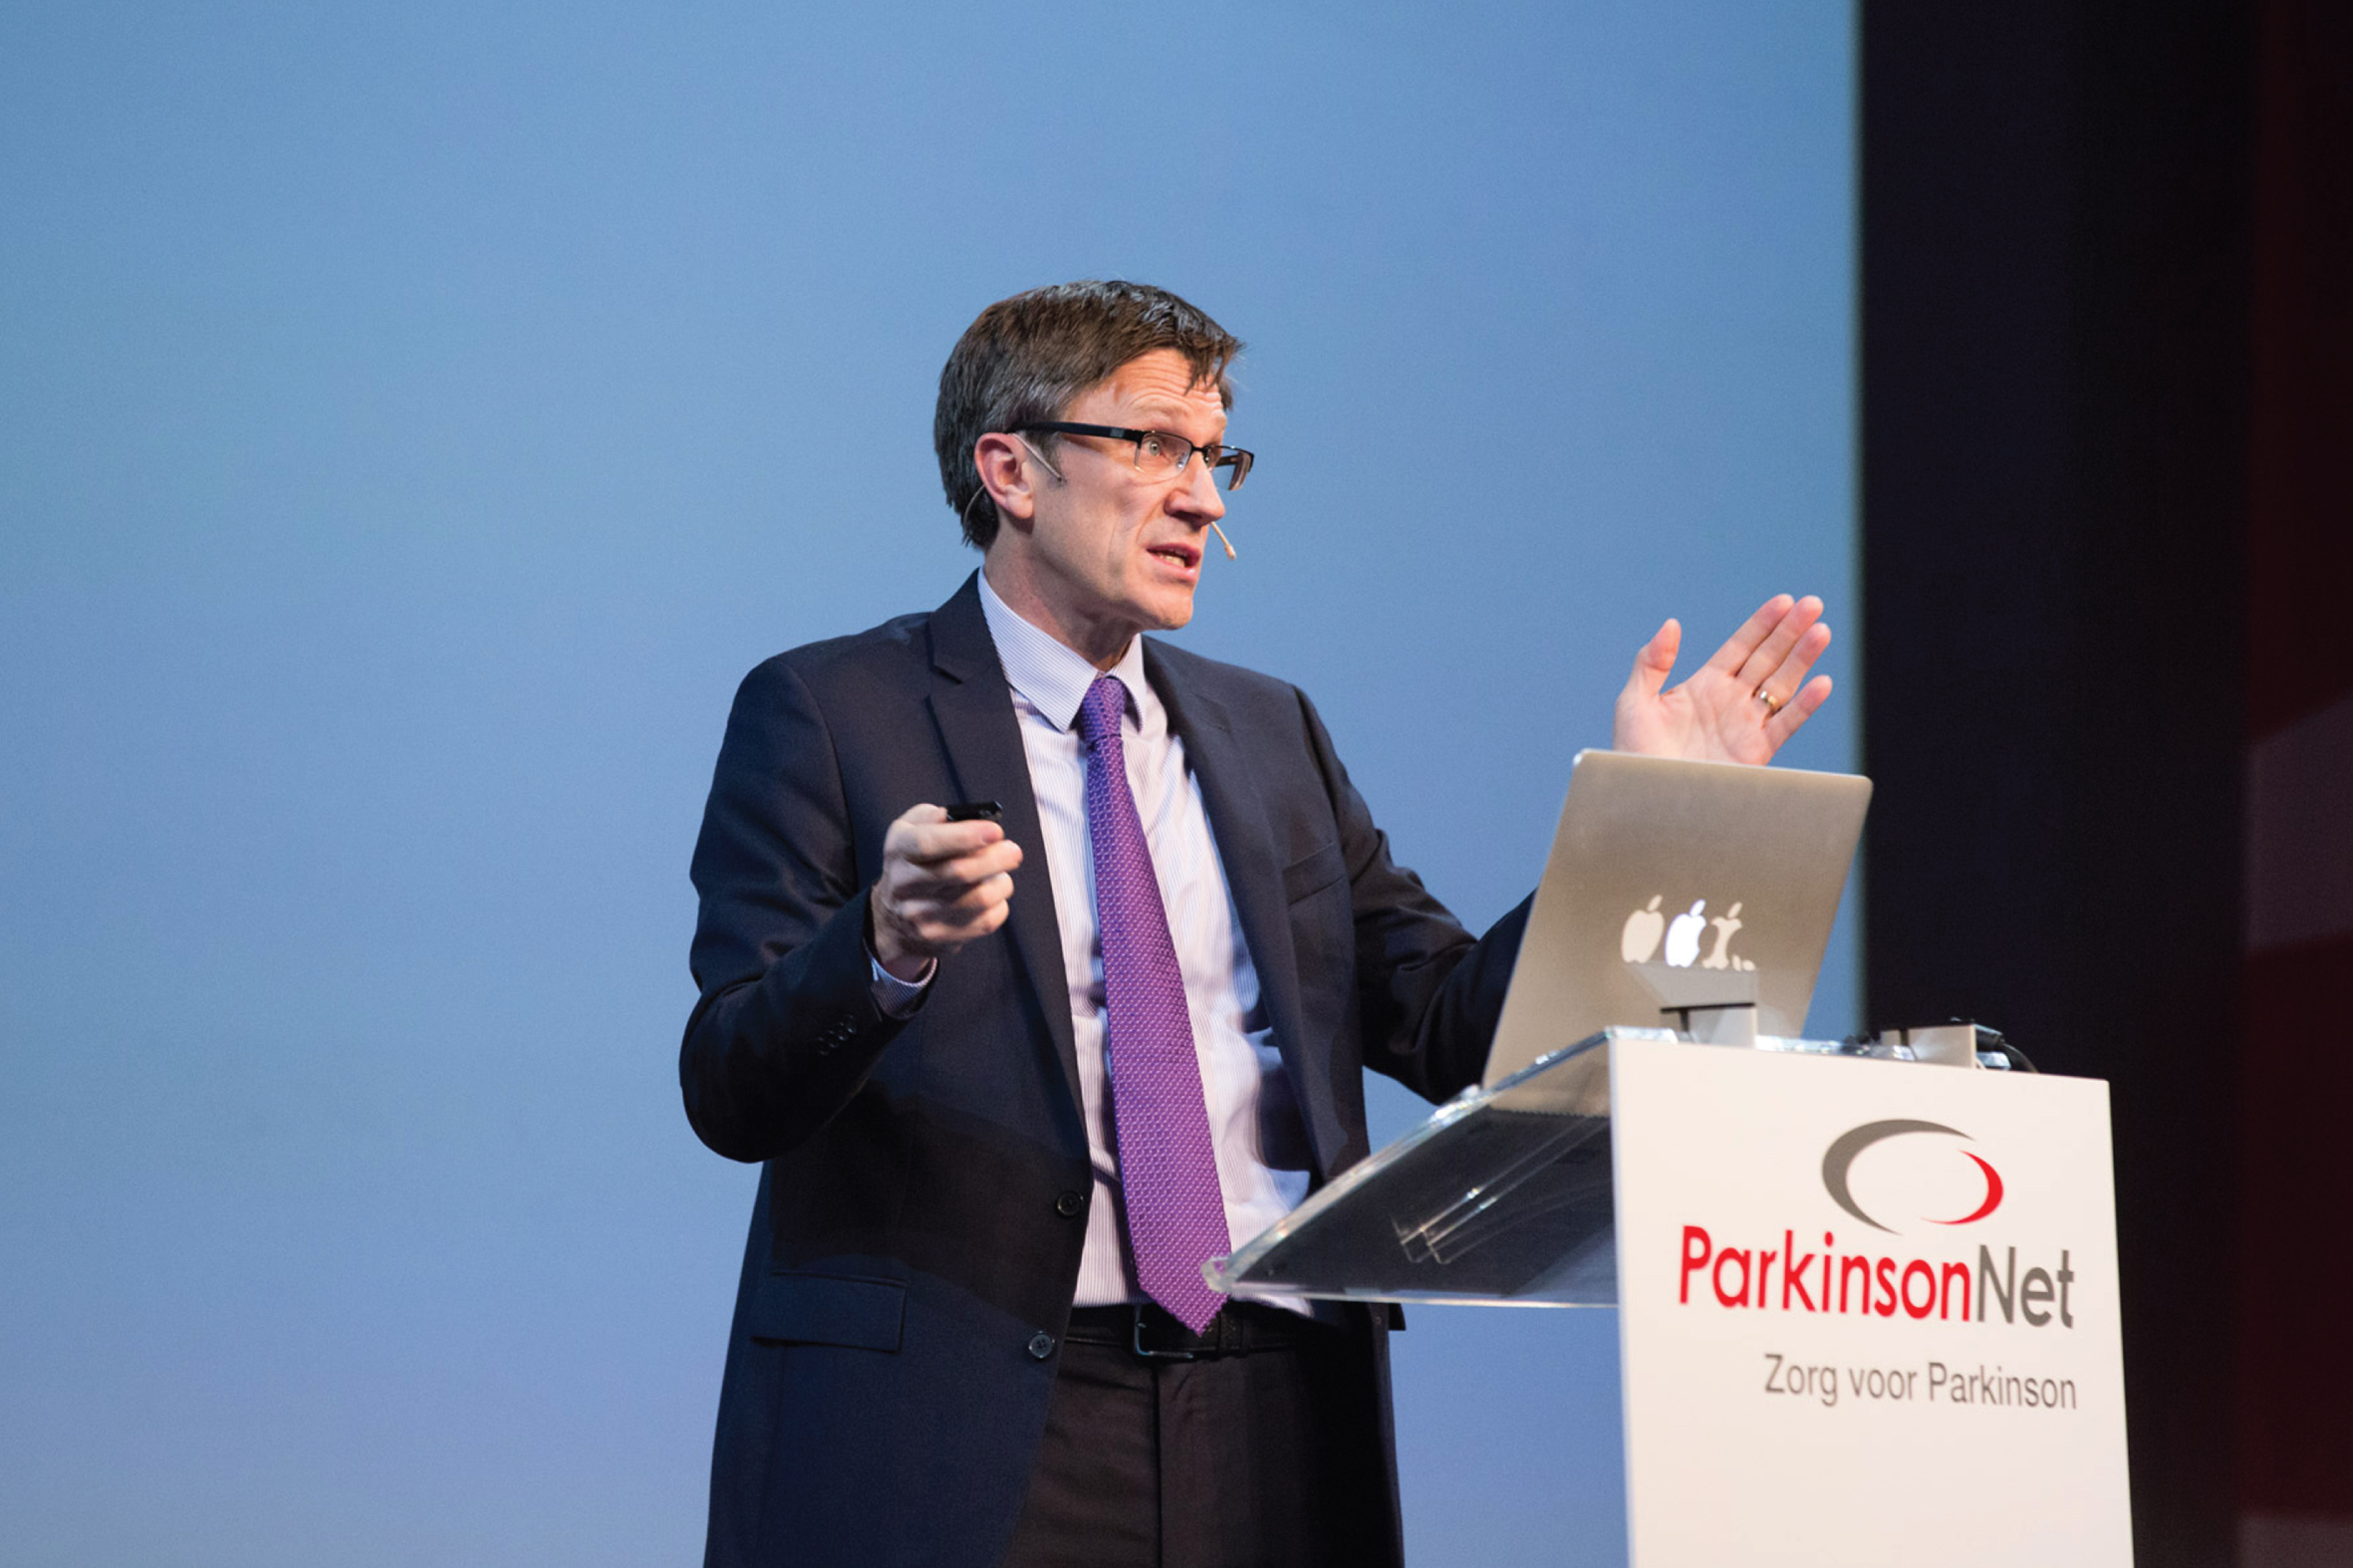 Patrik in action during a plenary keynote lecture for the 2014 ParkinsonNet annual conference.